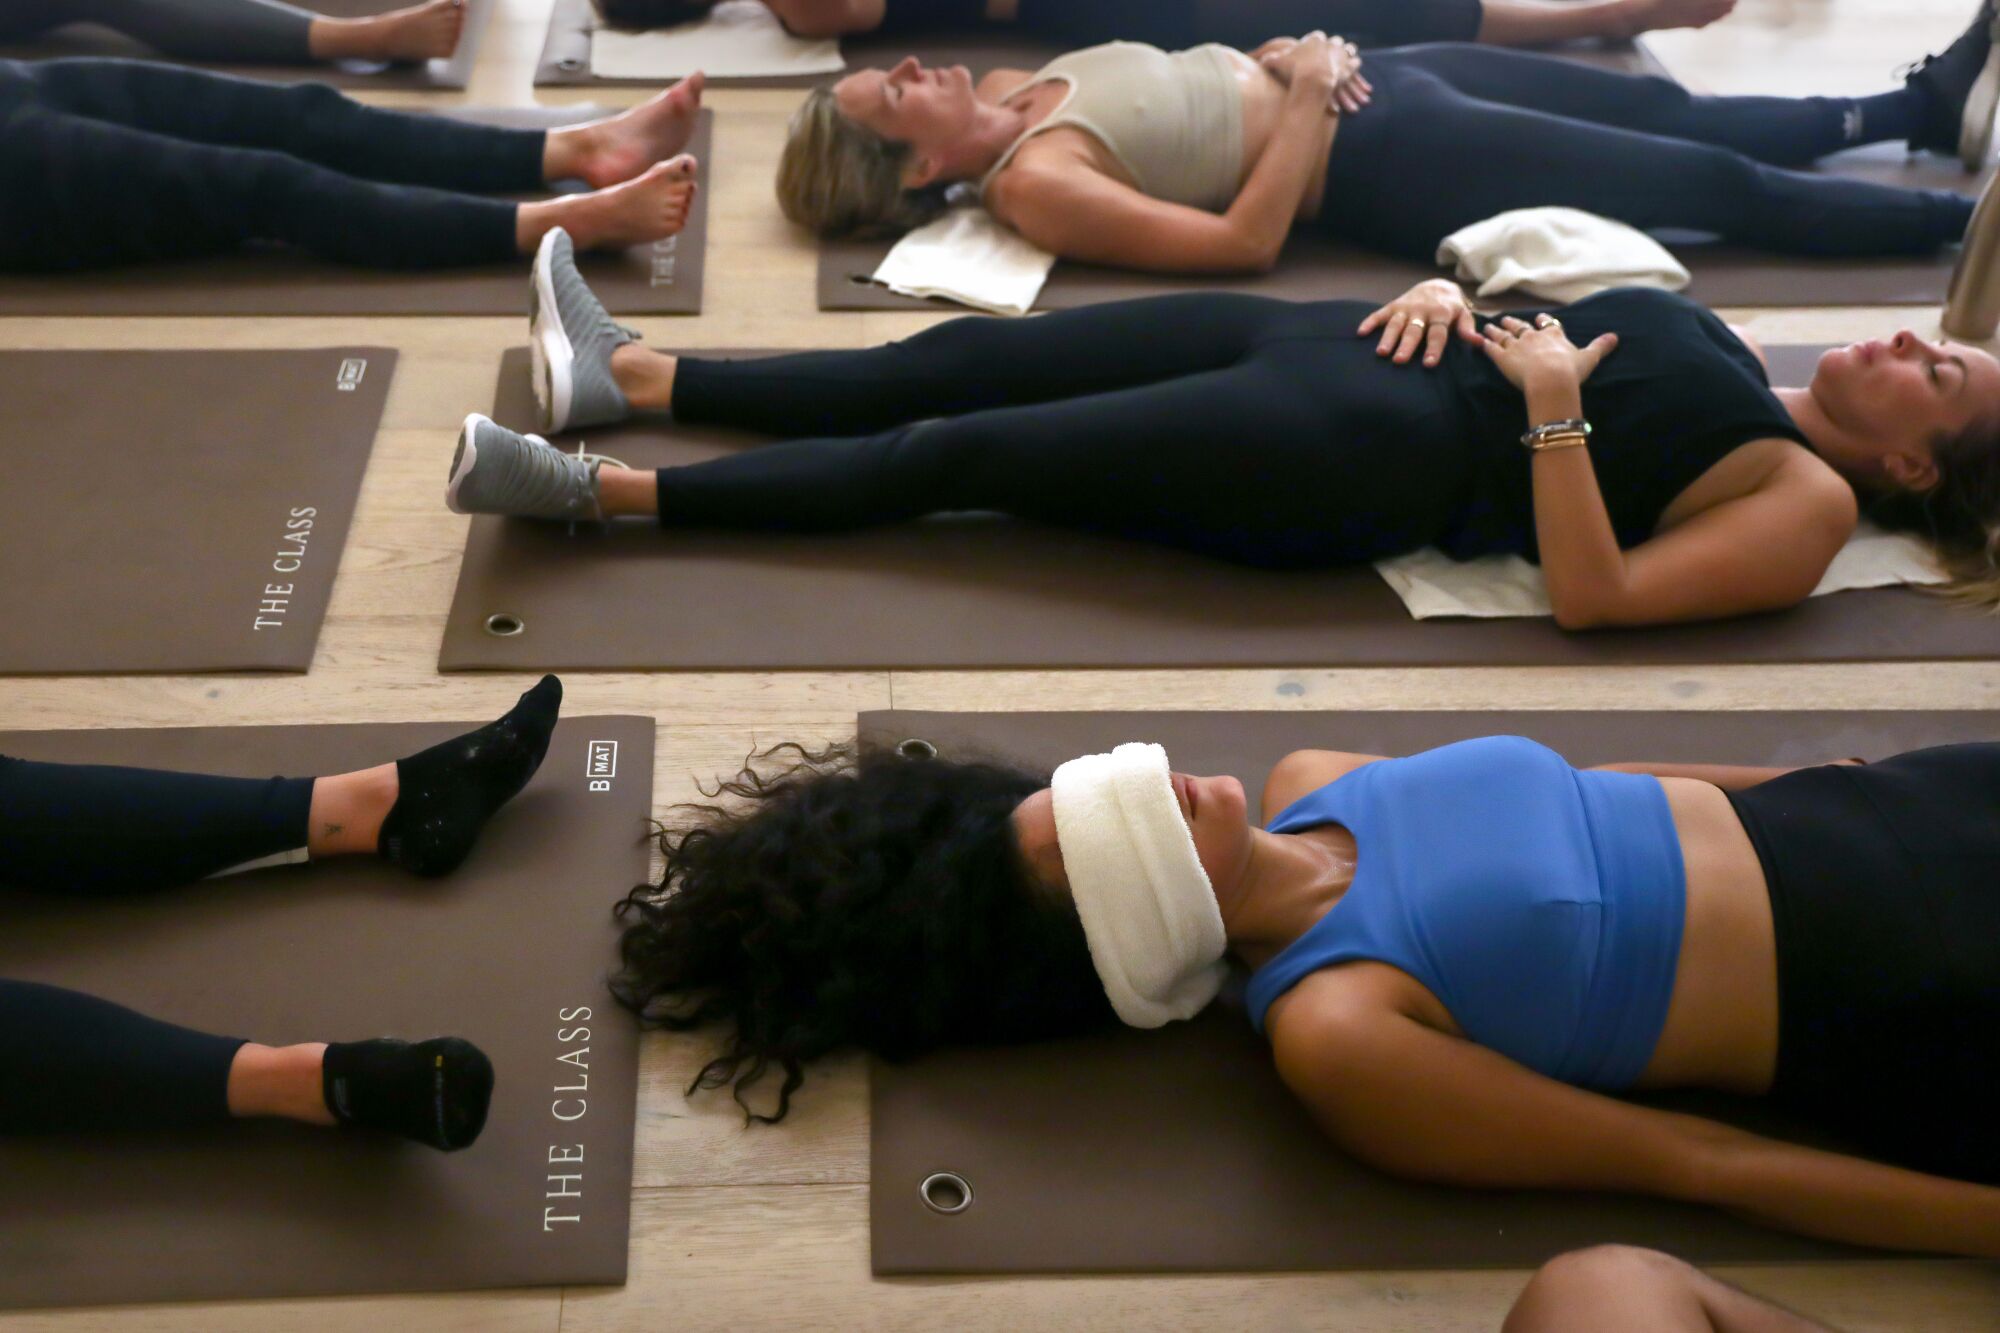 People lying flat on their backs upon yoga mats, one woman with a towel over her eyes